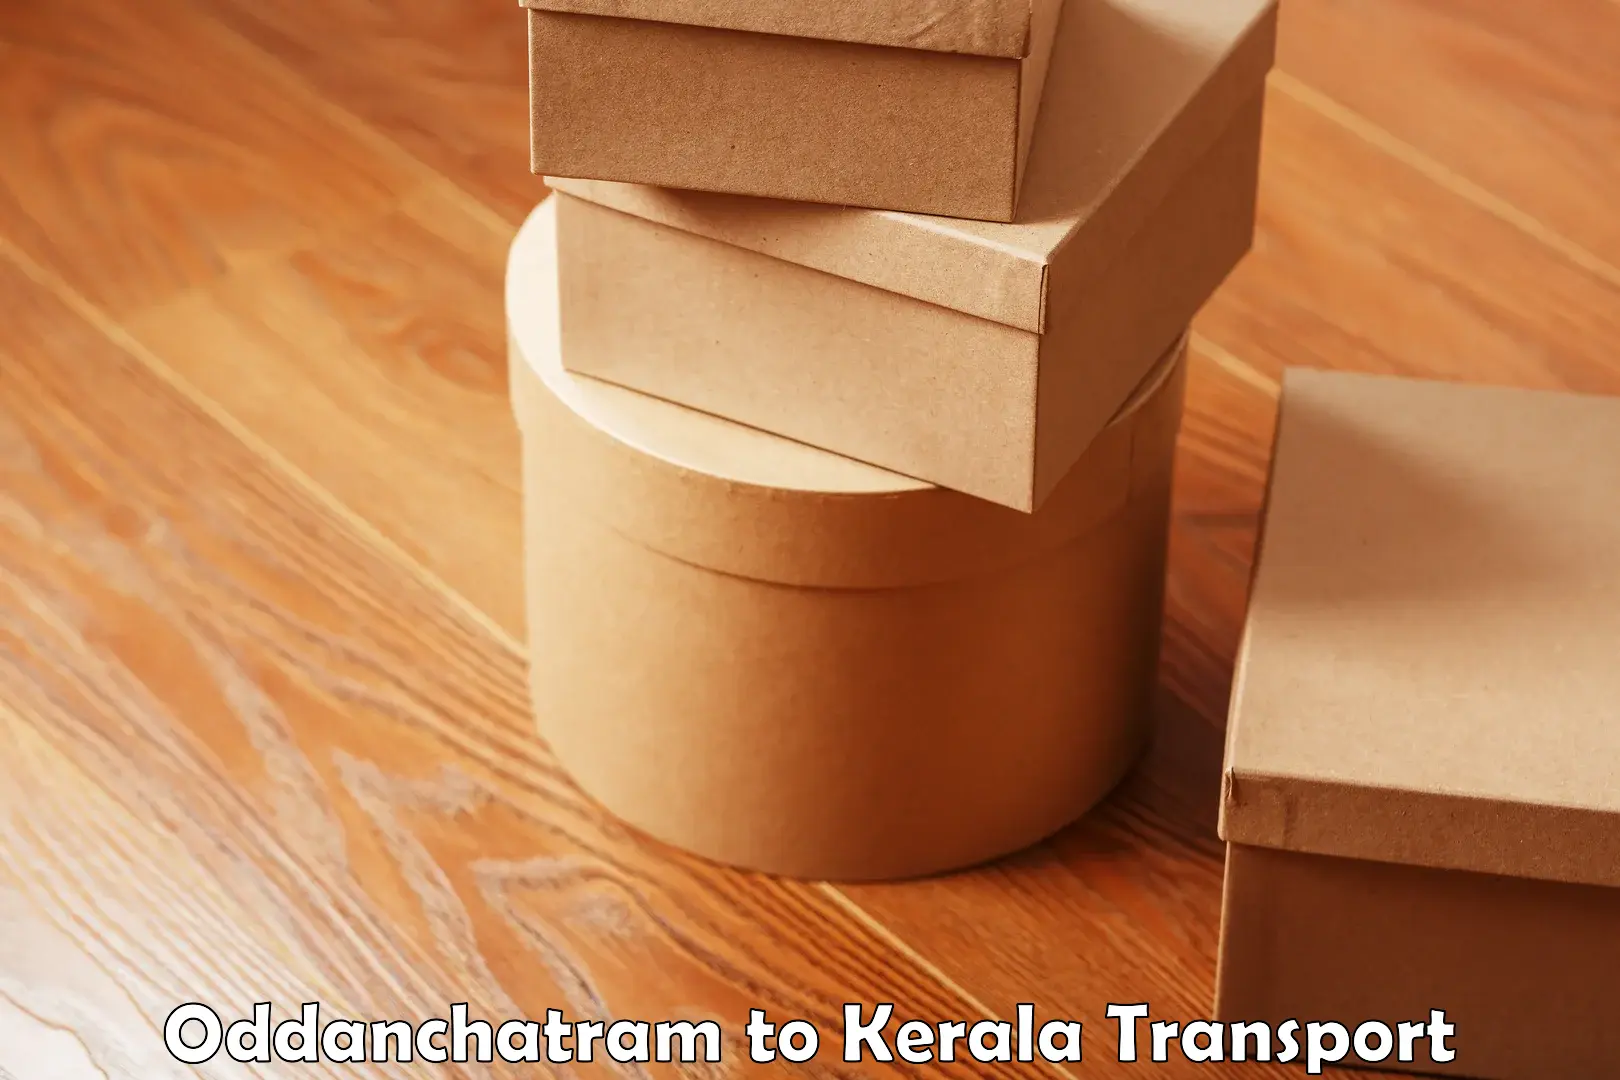 Road transport online services Oddanchatram to Chalakudy